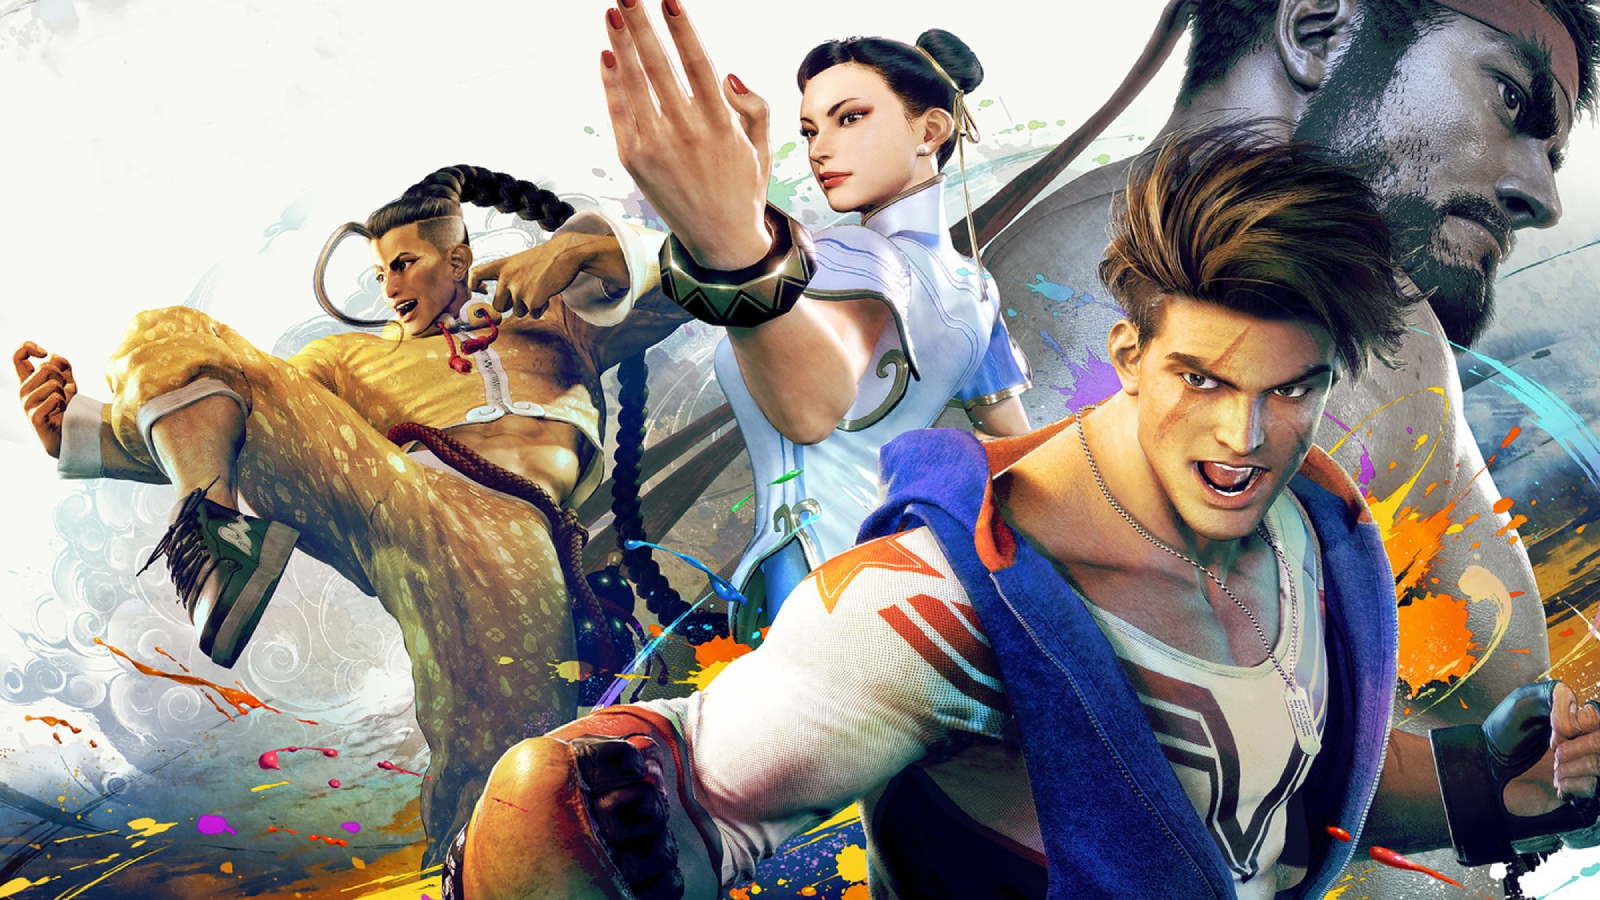 STREET FIGHTER 6 DELUXE EDITION - PS4 —